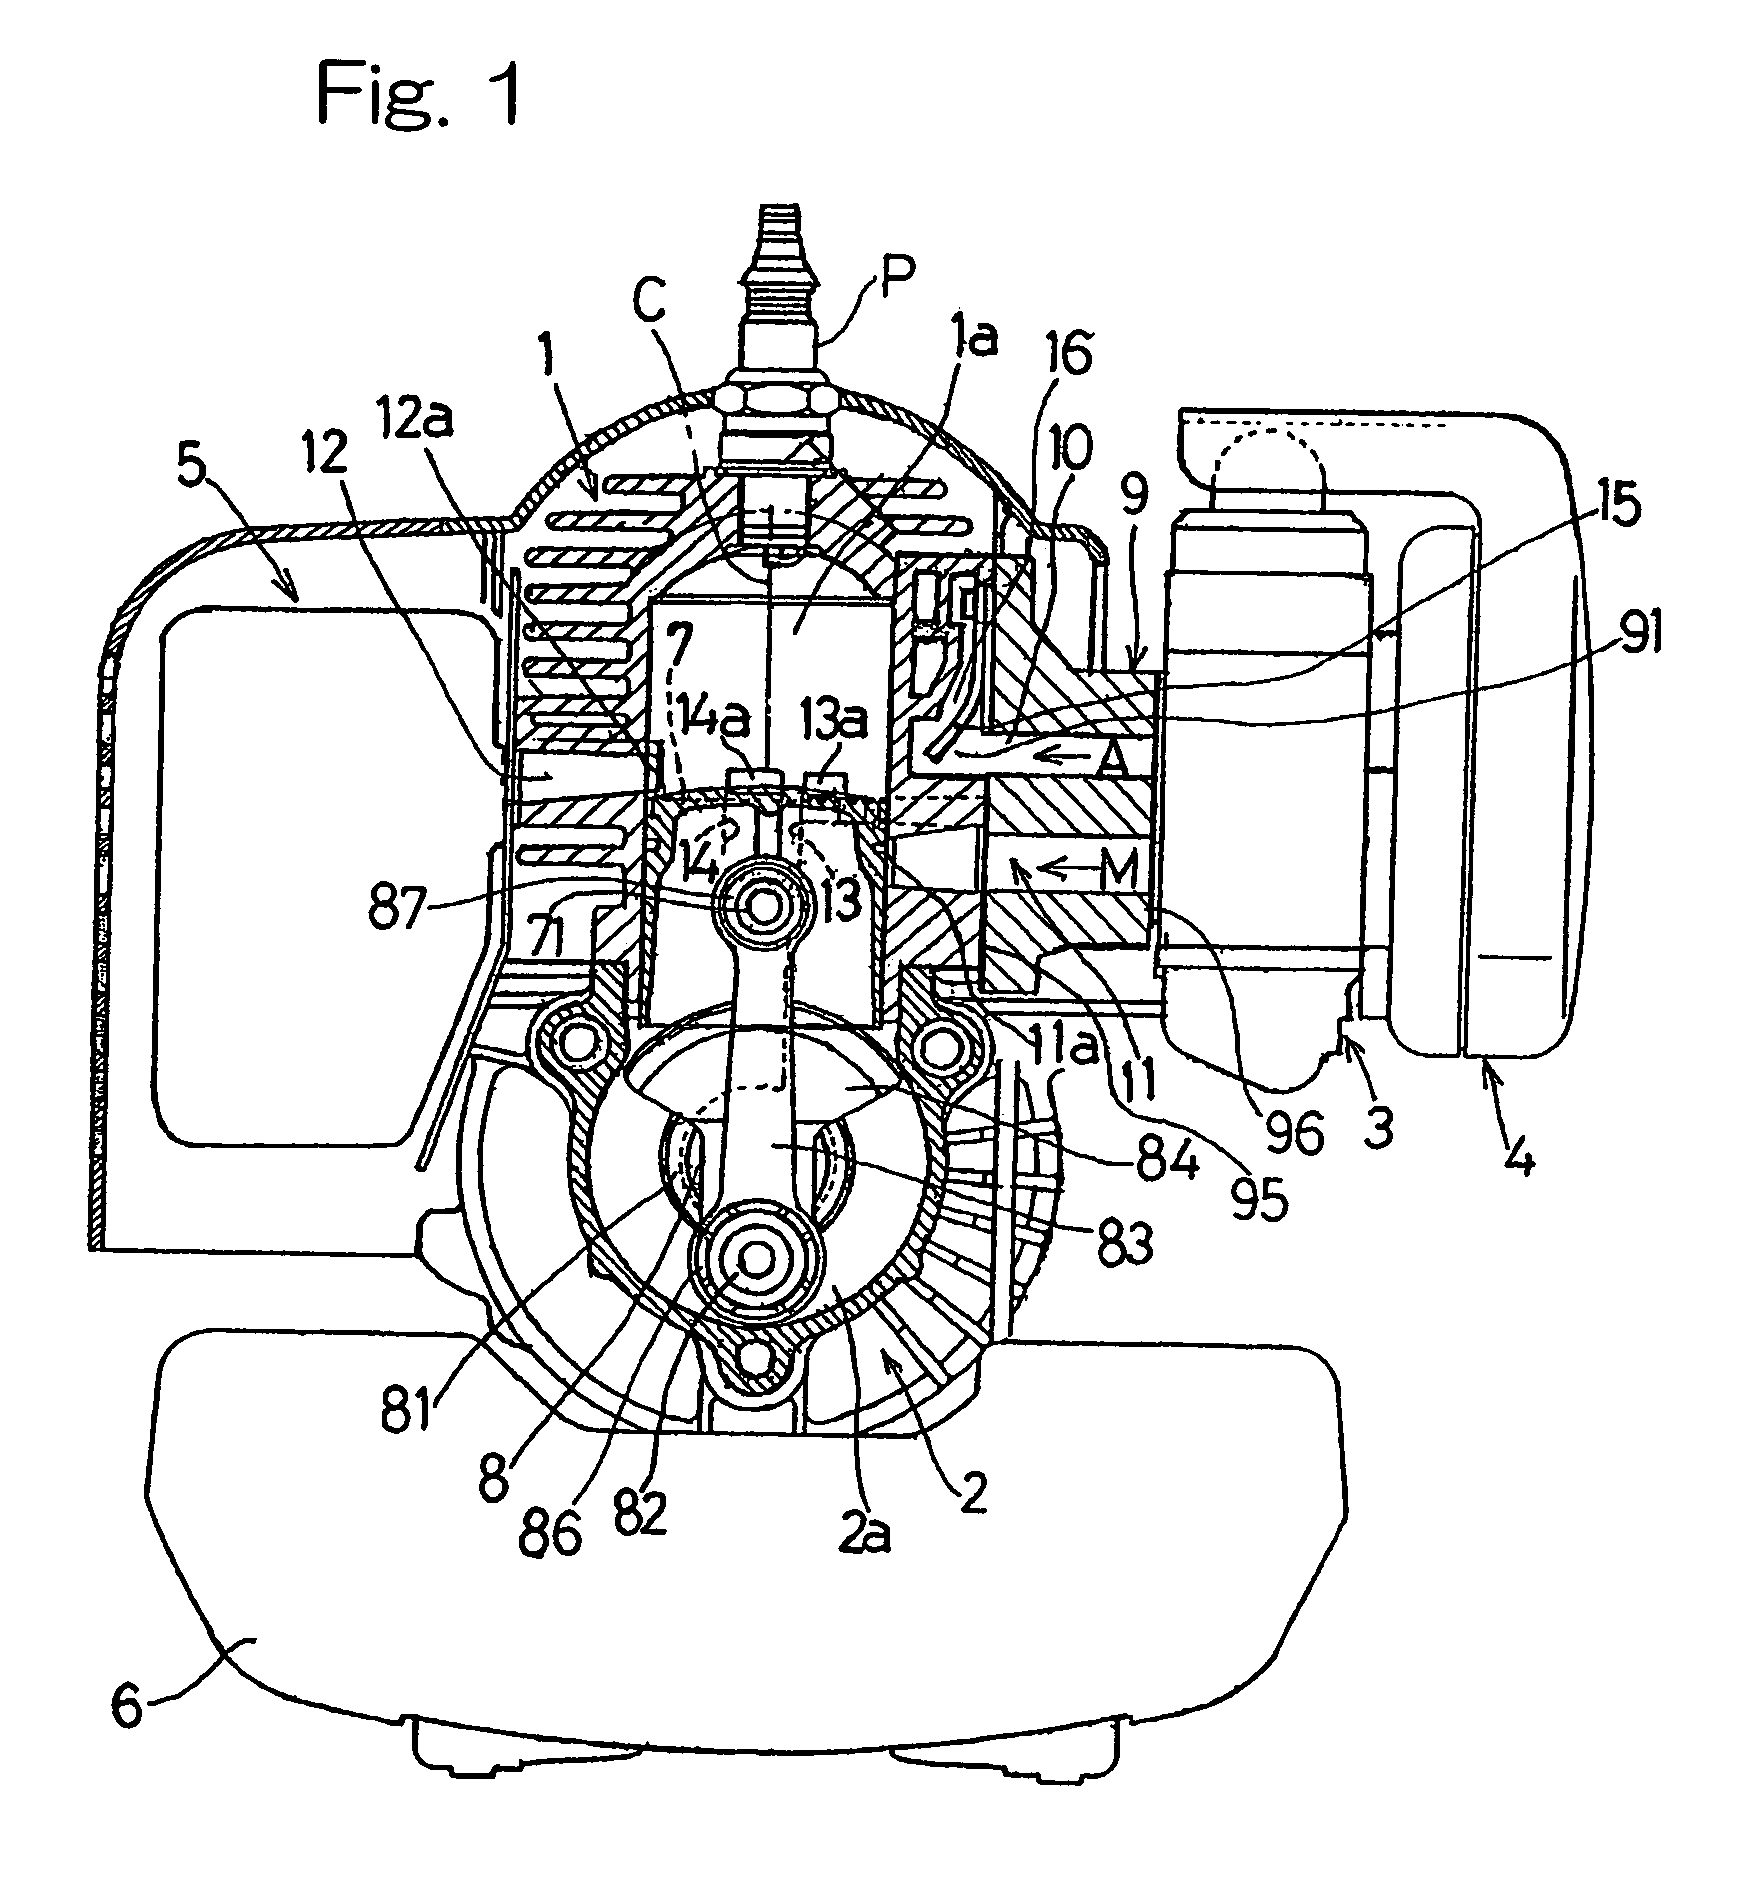 Two-cycle combustion engine with air scavenging system